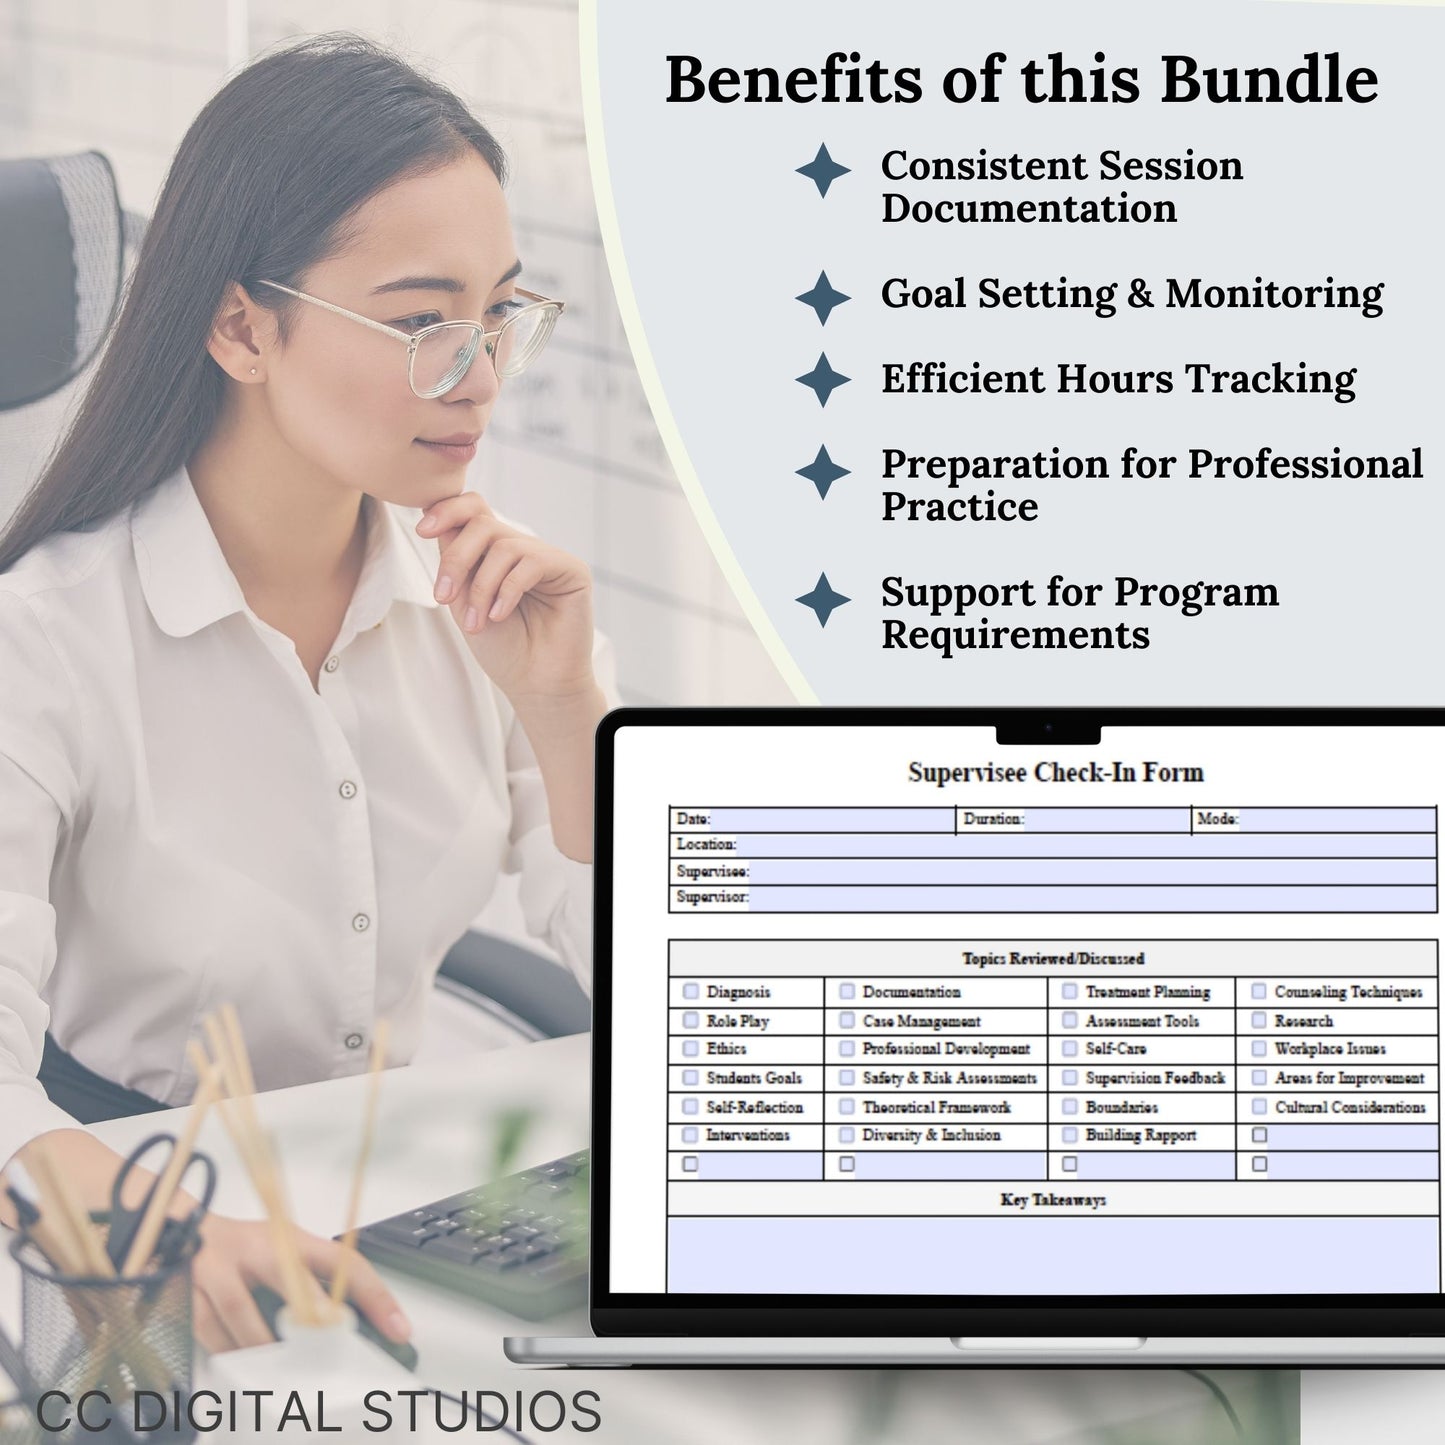 Elevate your counseling practicum or internship experience with our toolkit featuring Google Doc hours logs, supervision forms, supervision notes therapy templates. 280 self-reflections questions to ensure internship preparedness